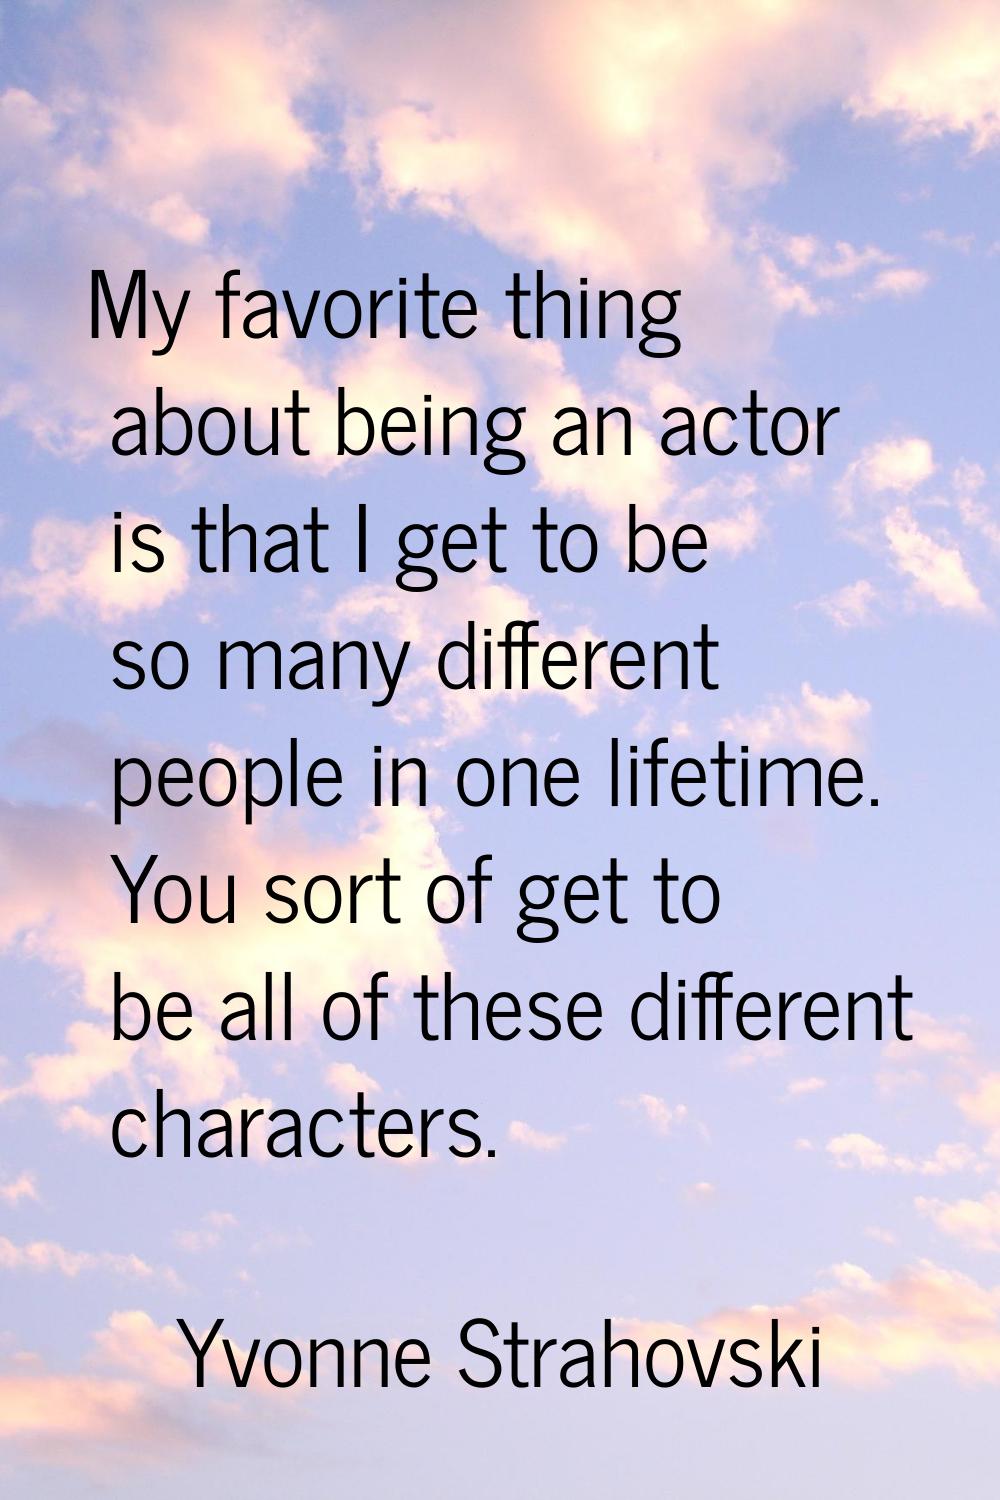 My favorite thing about being an actor is that I get to be so many different people in one lifetime